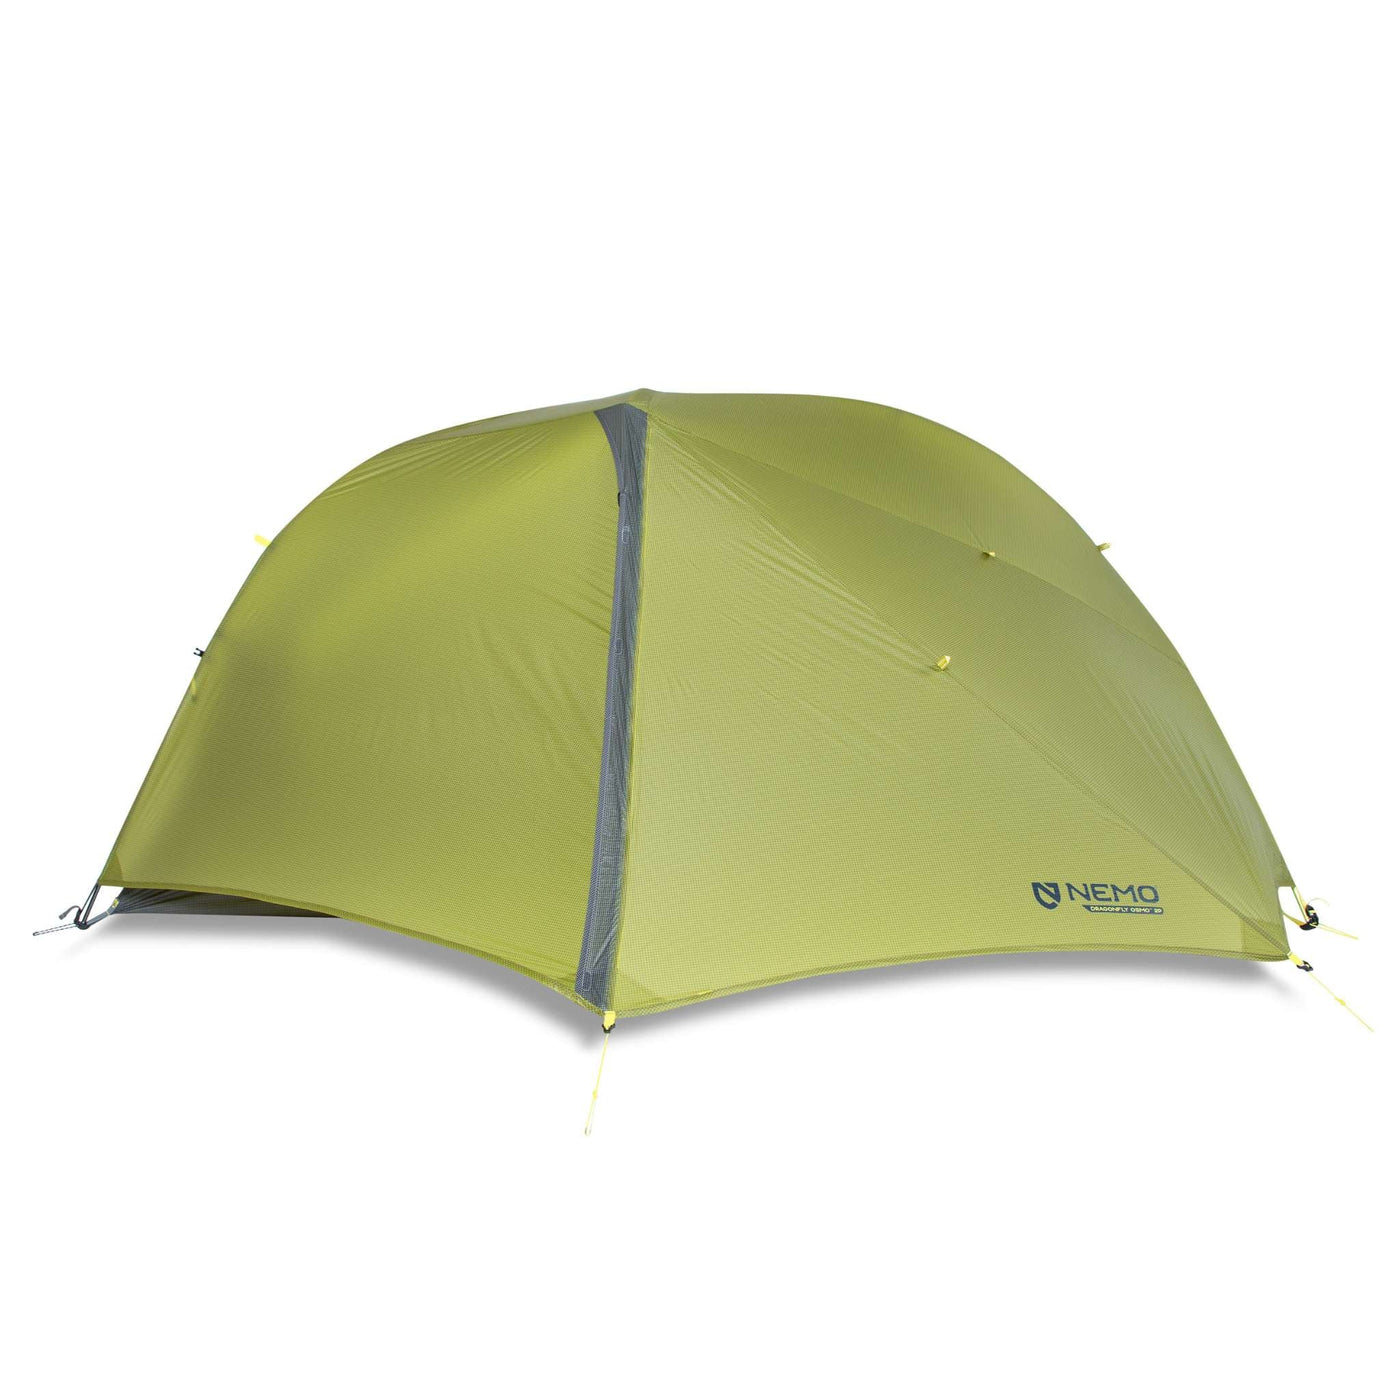 Nemo Dragonfly OSMO 2 Person Tent